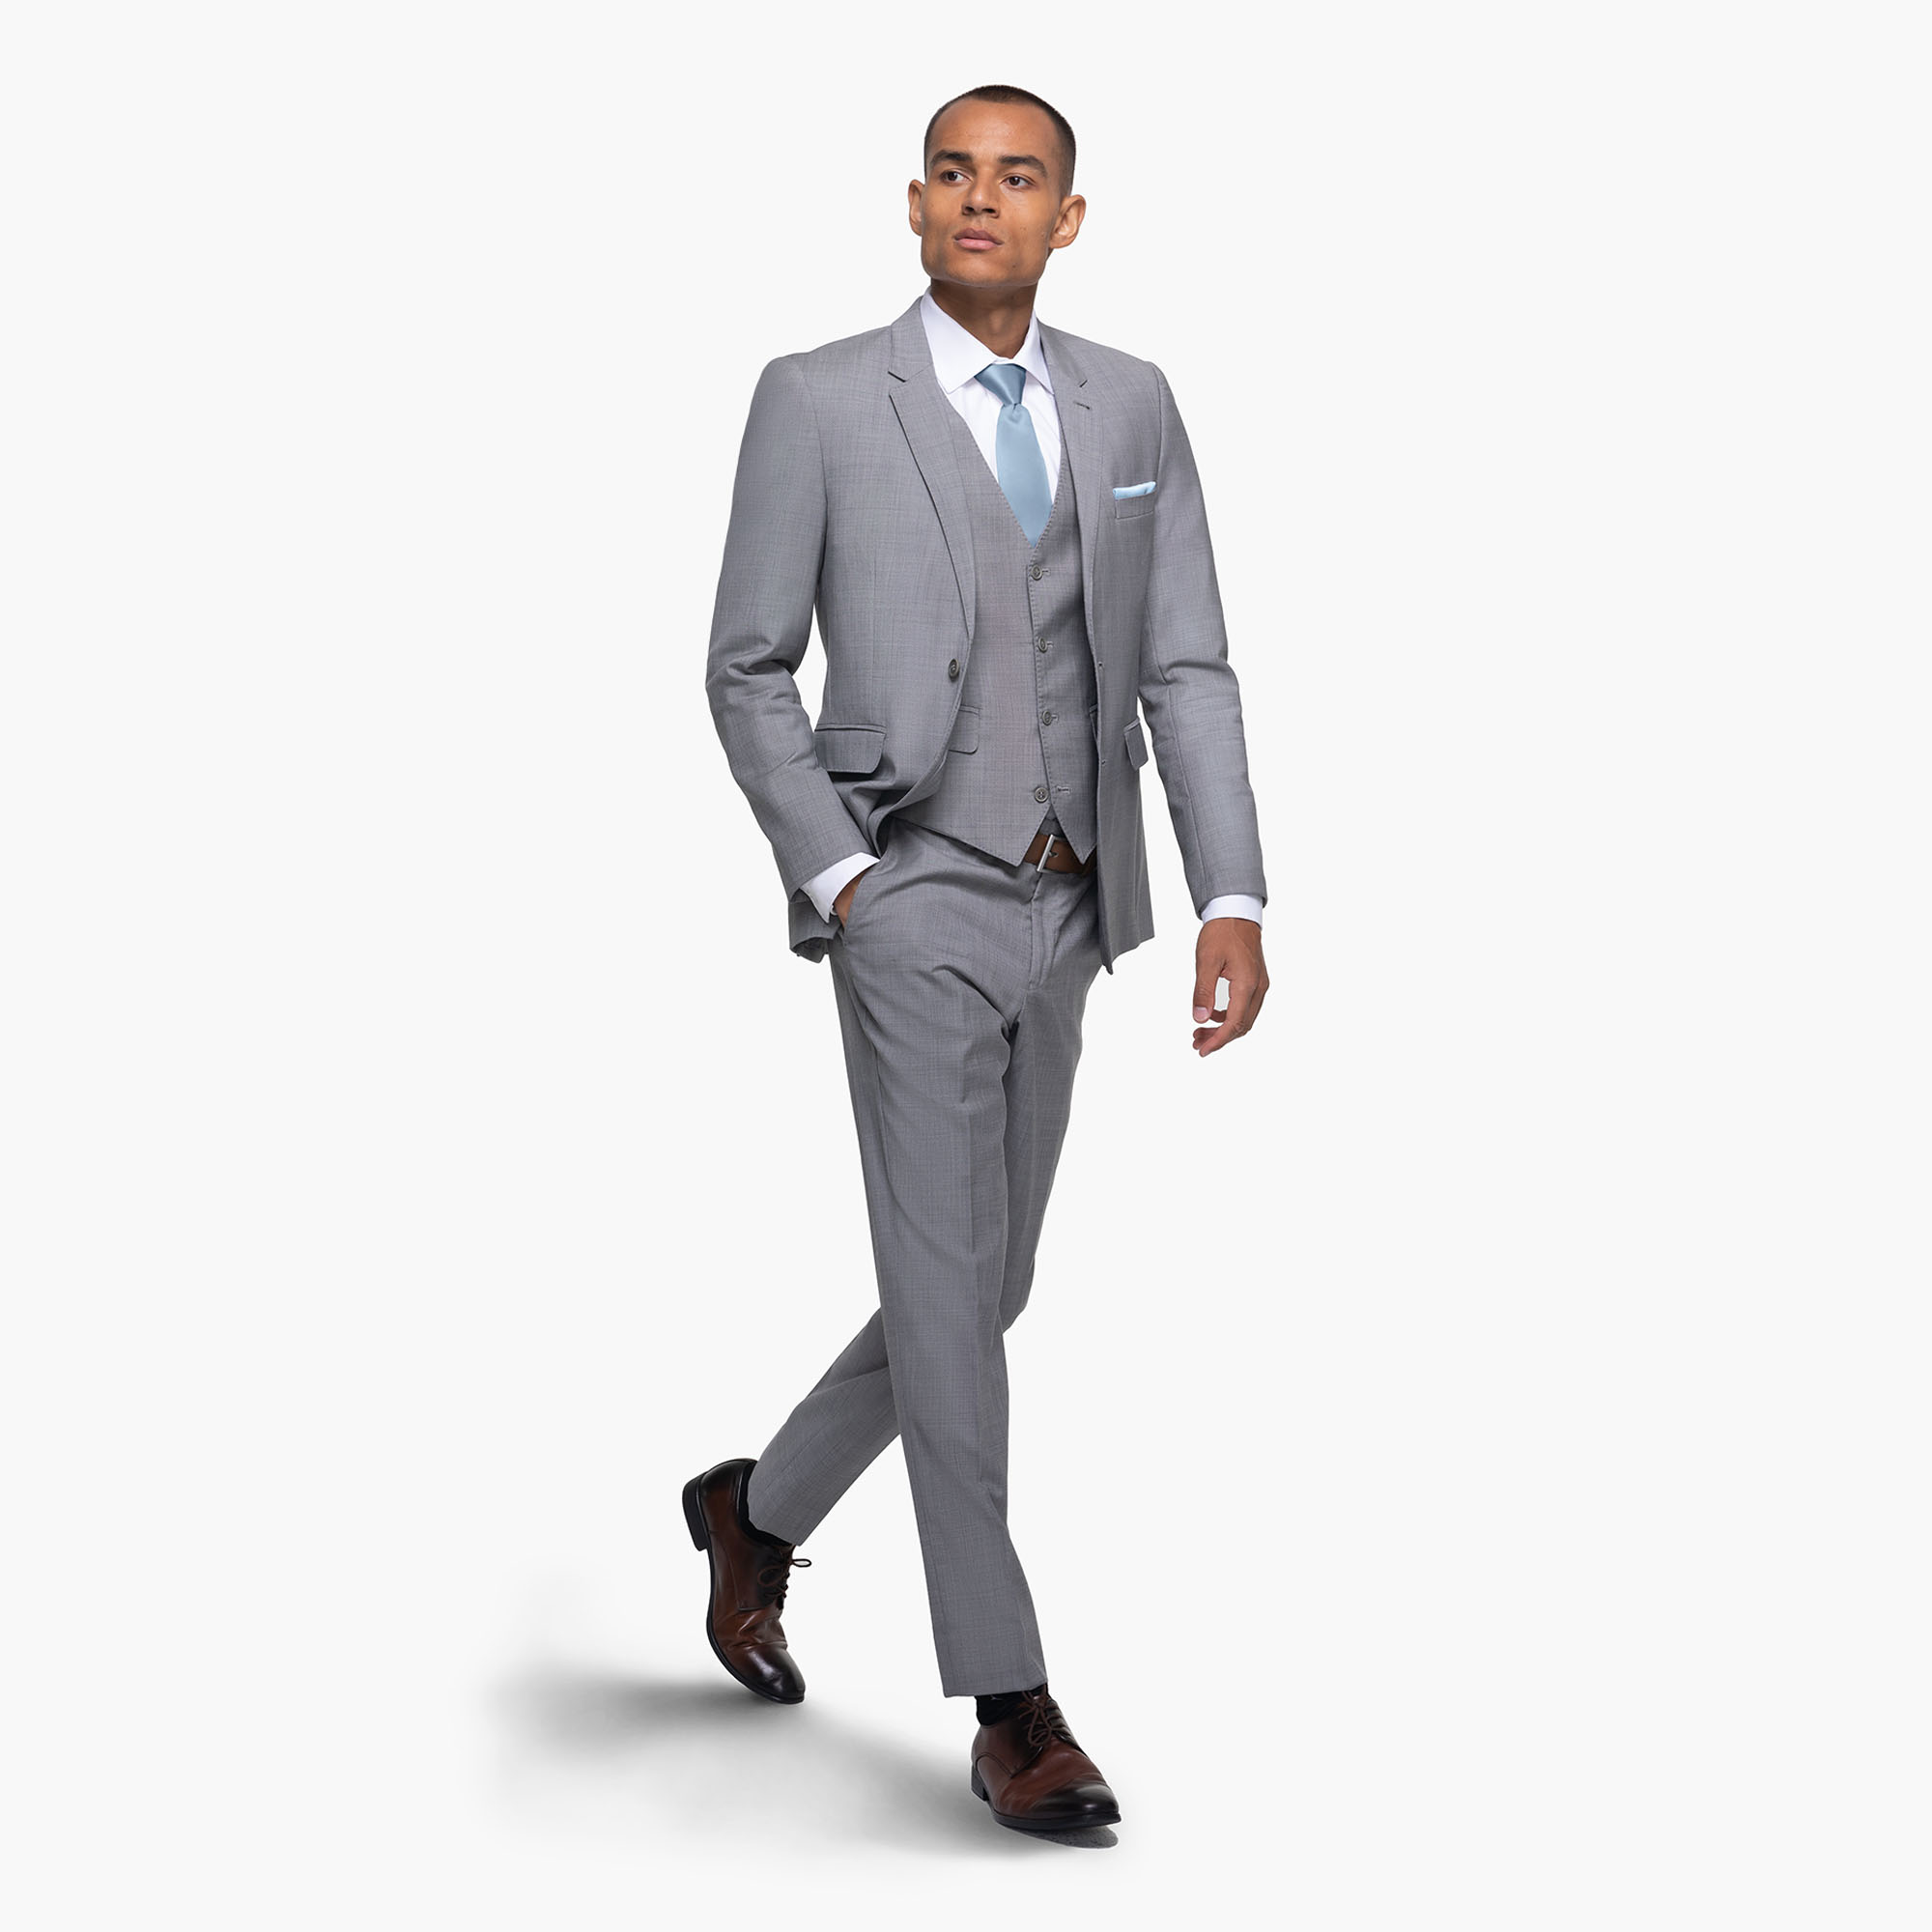 Menswear | Gray suit, Color of life, White shirt